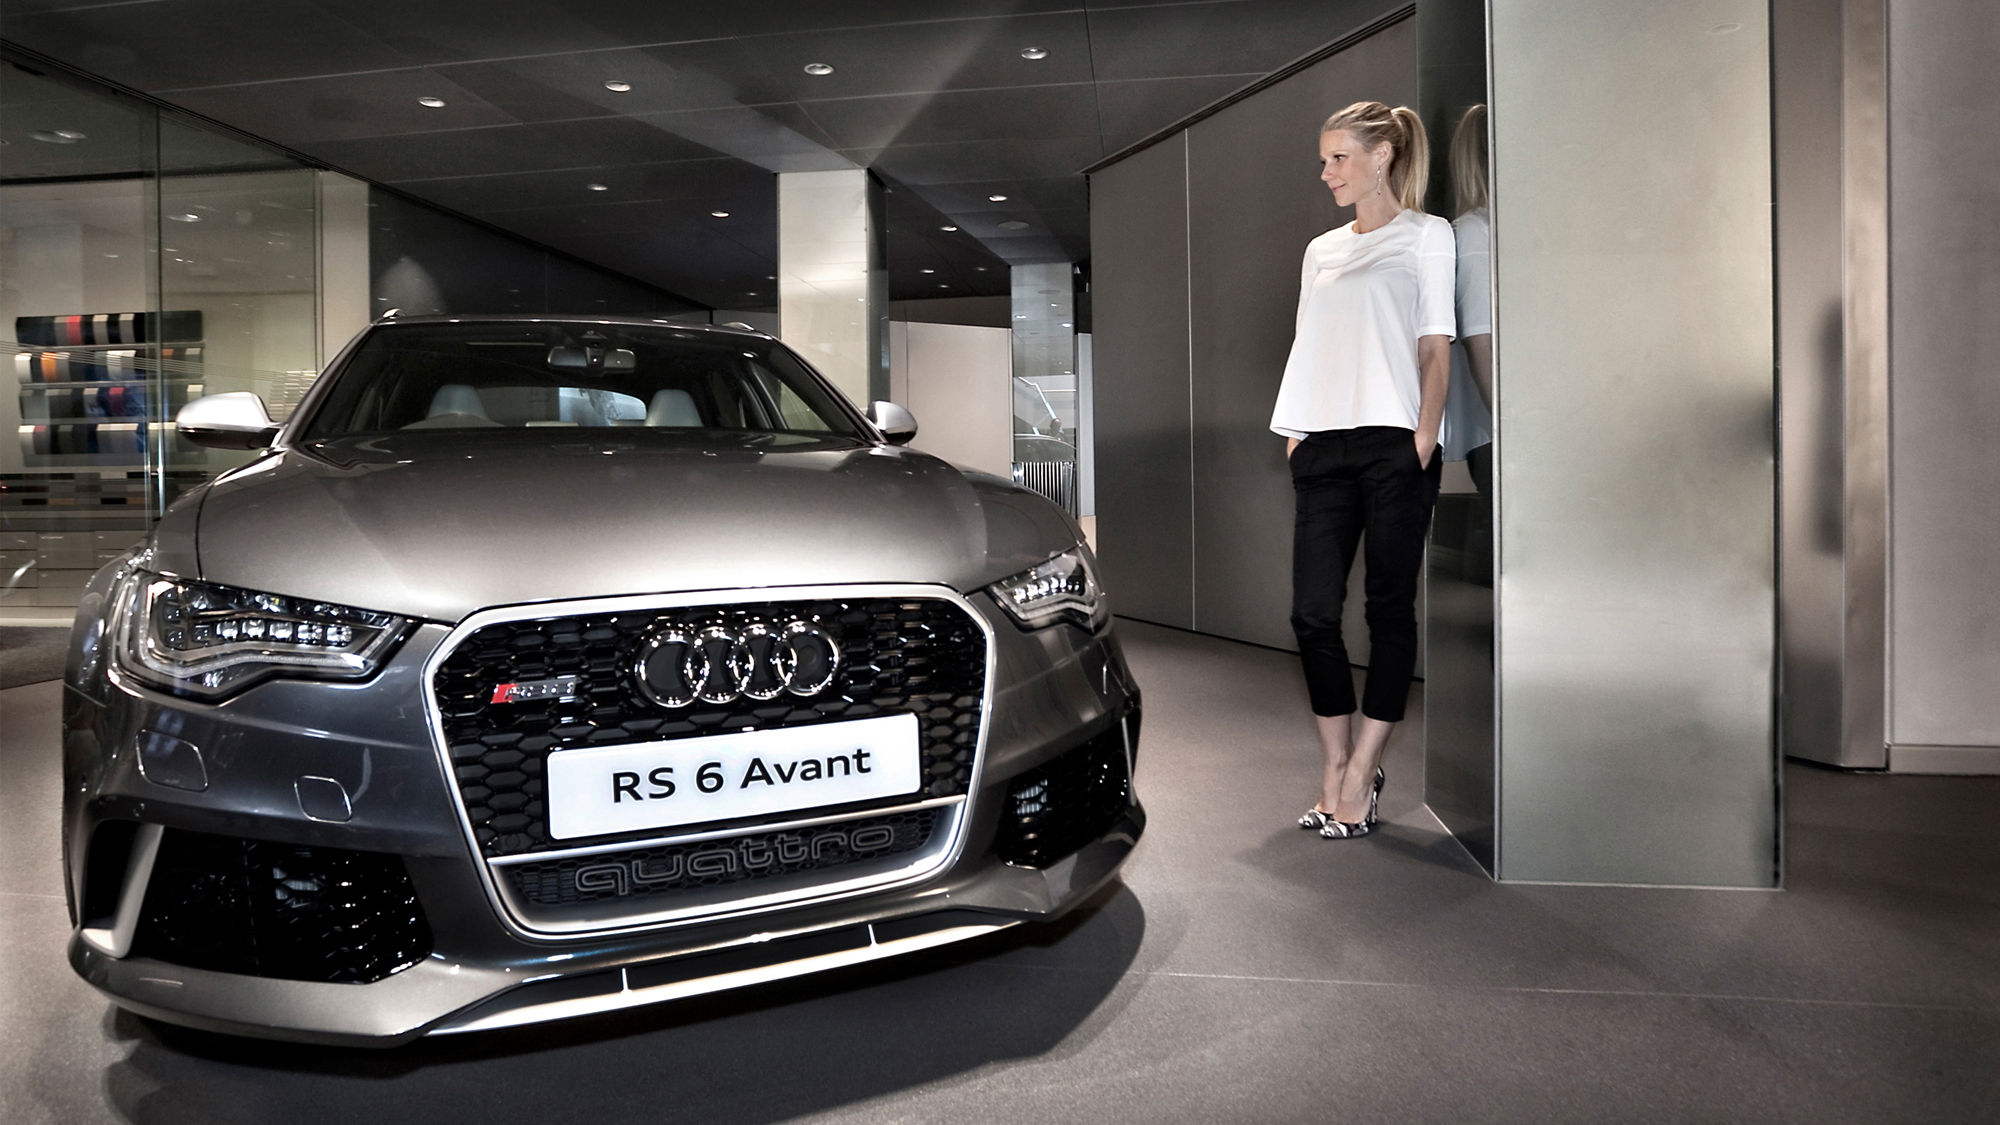 Gwyneth Paltrow and the 2014 Audi RS 6 Avant